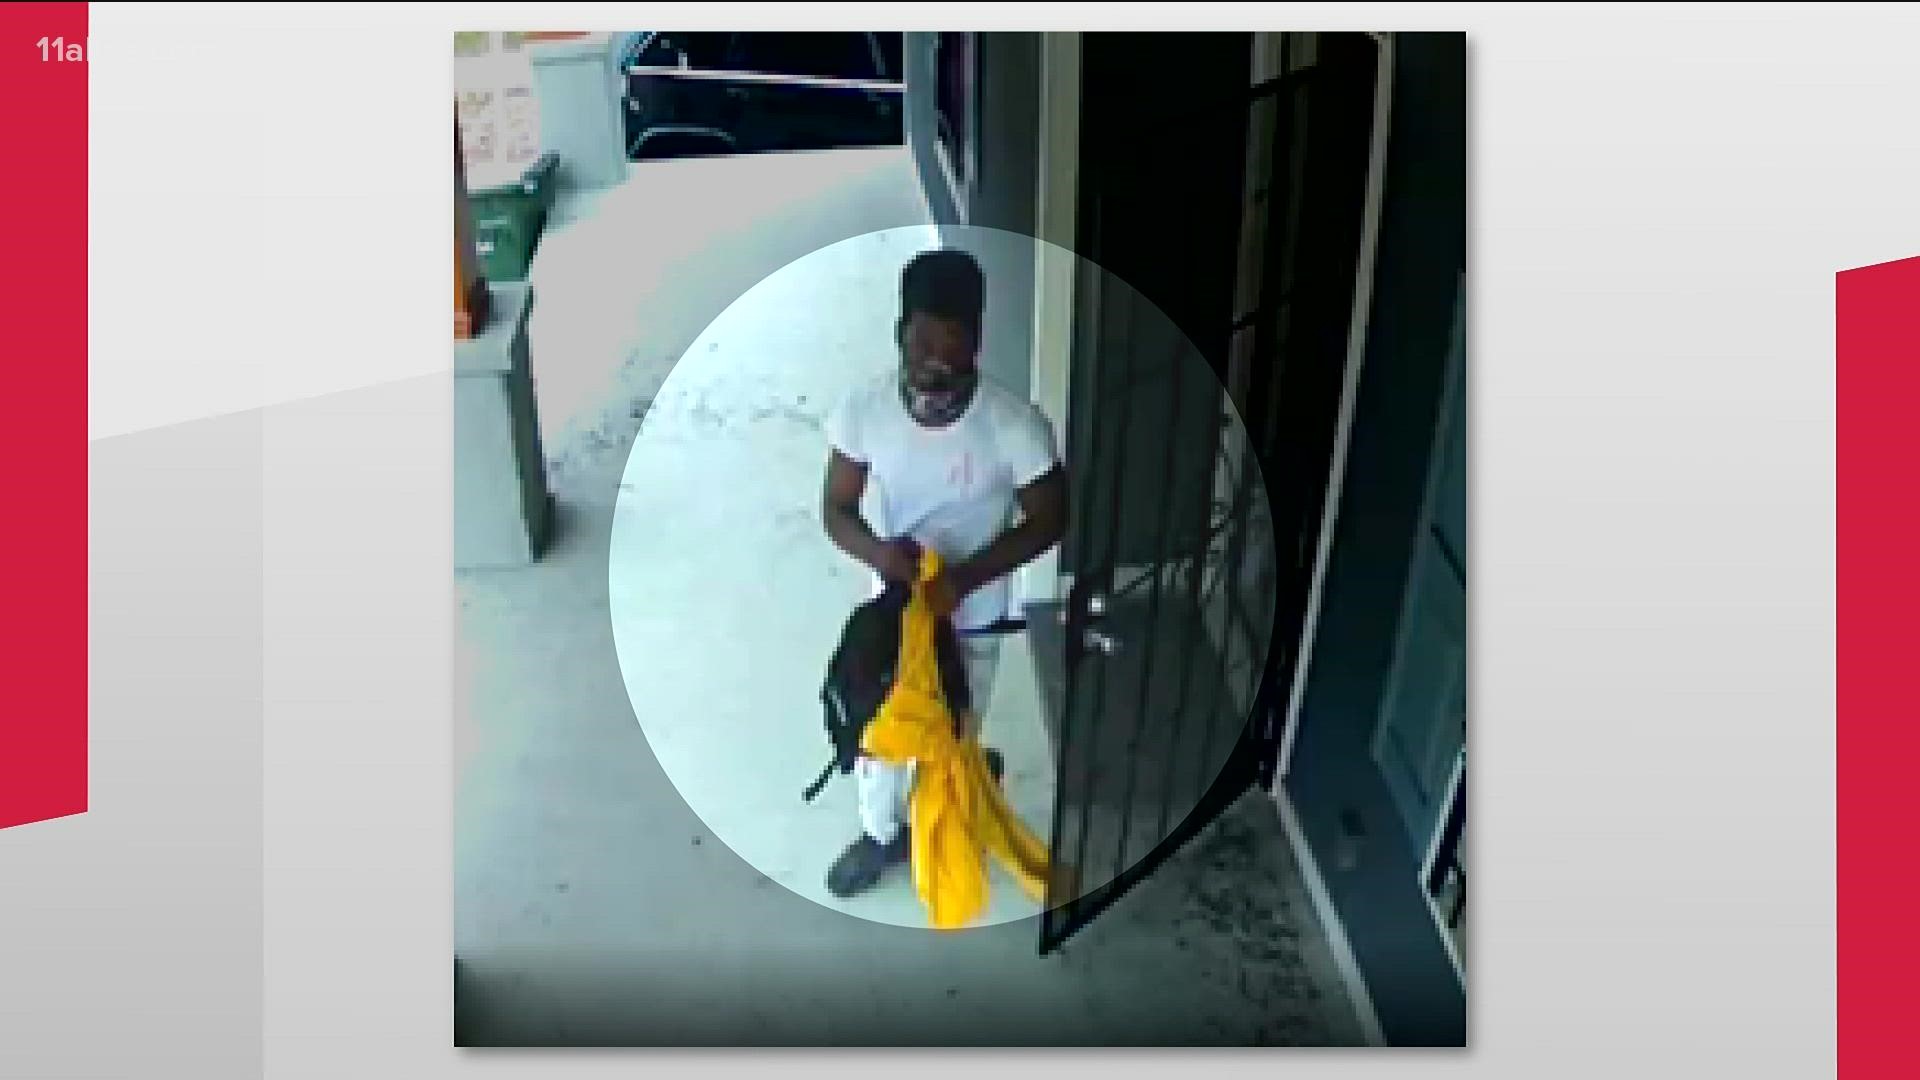 The Atlanta Police Department is seeking the public's help in identifying multiple persons of interest concerning a recent homicide investigation.